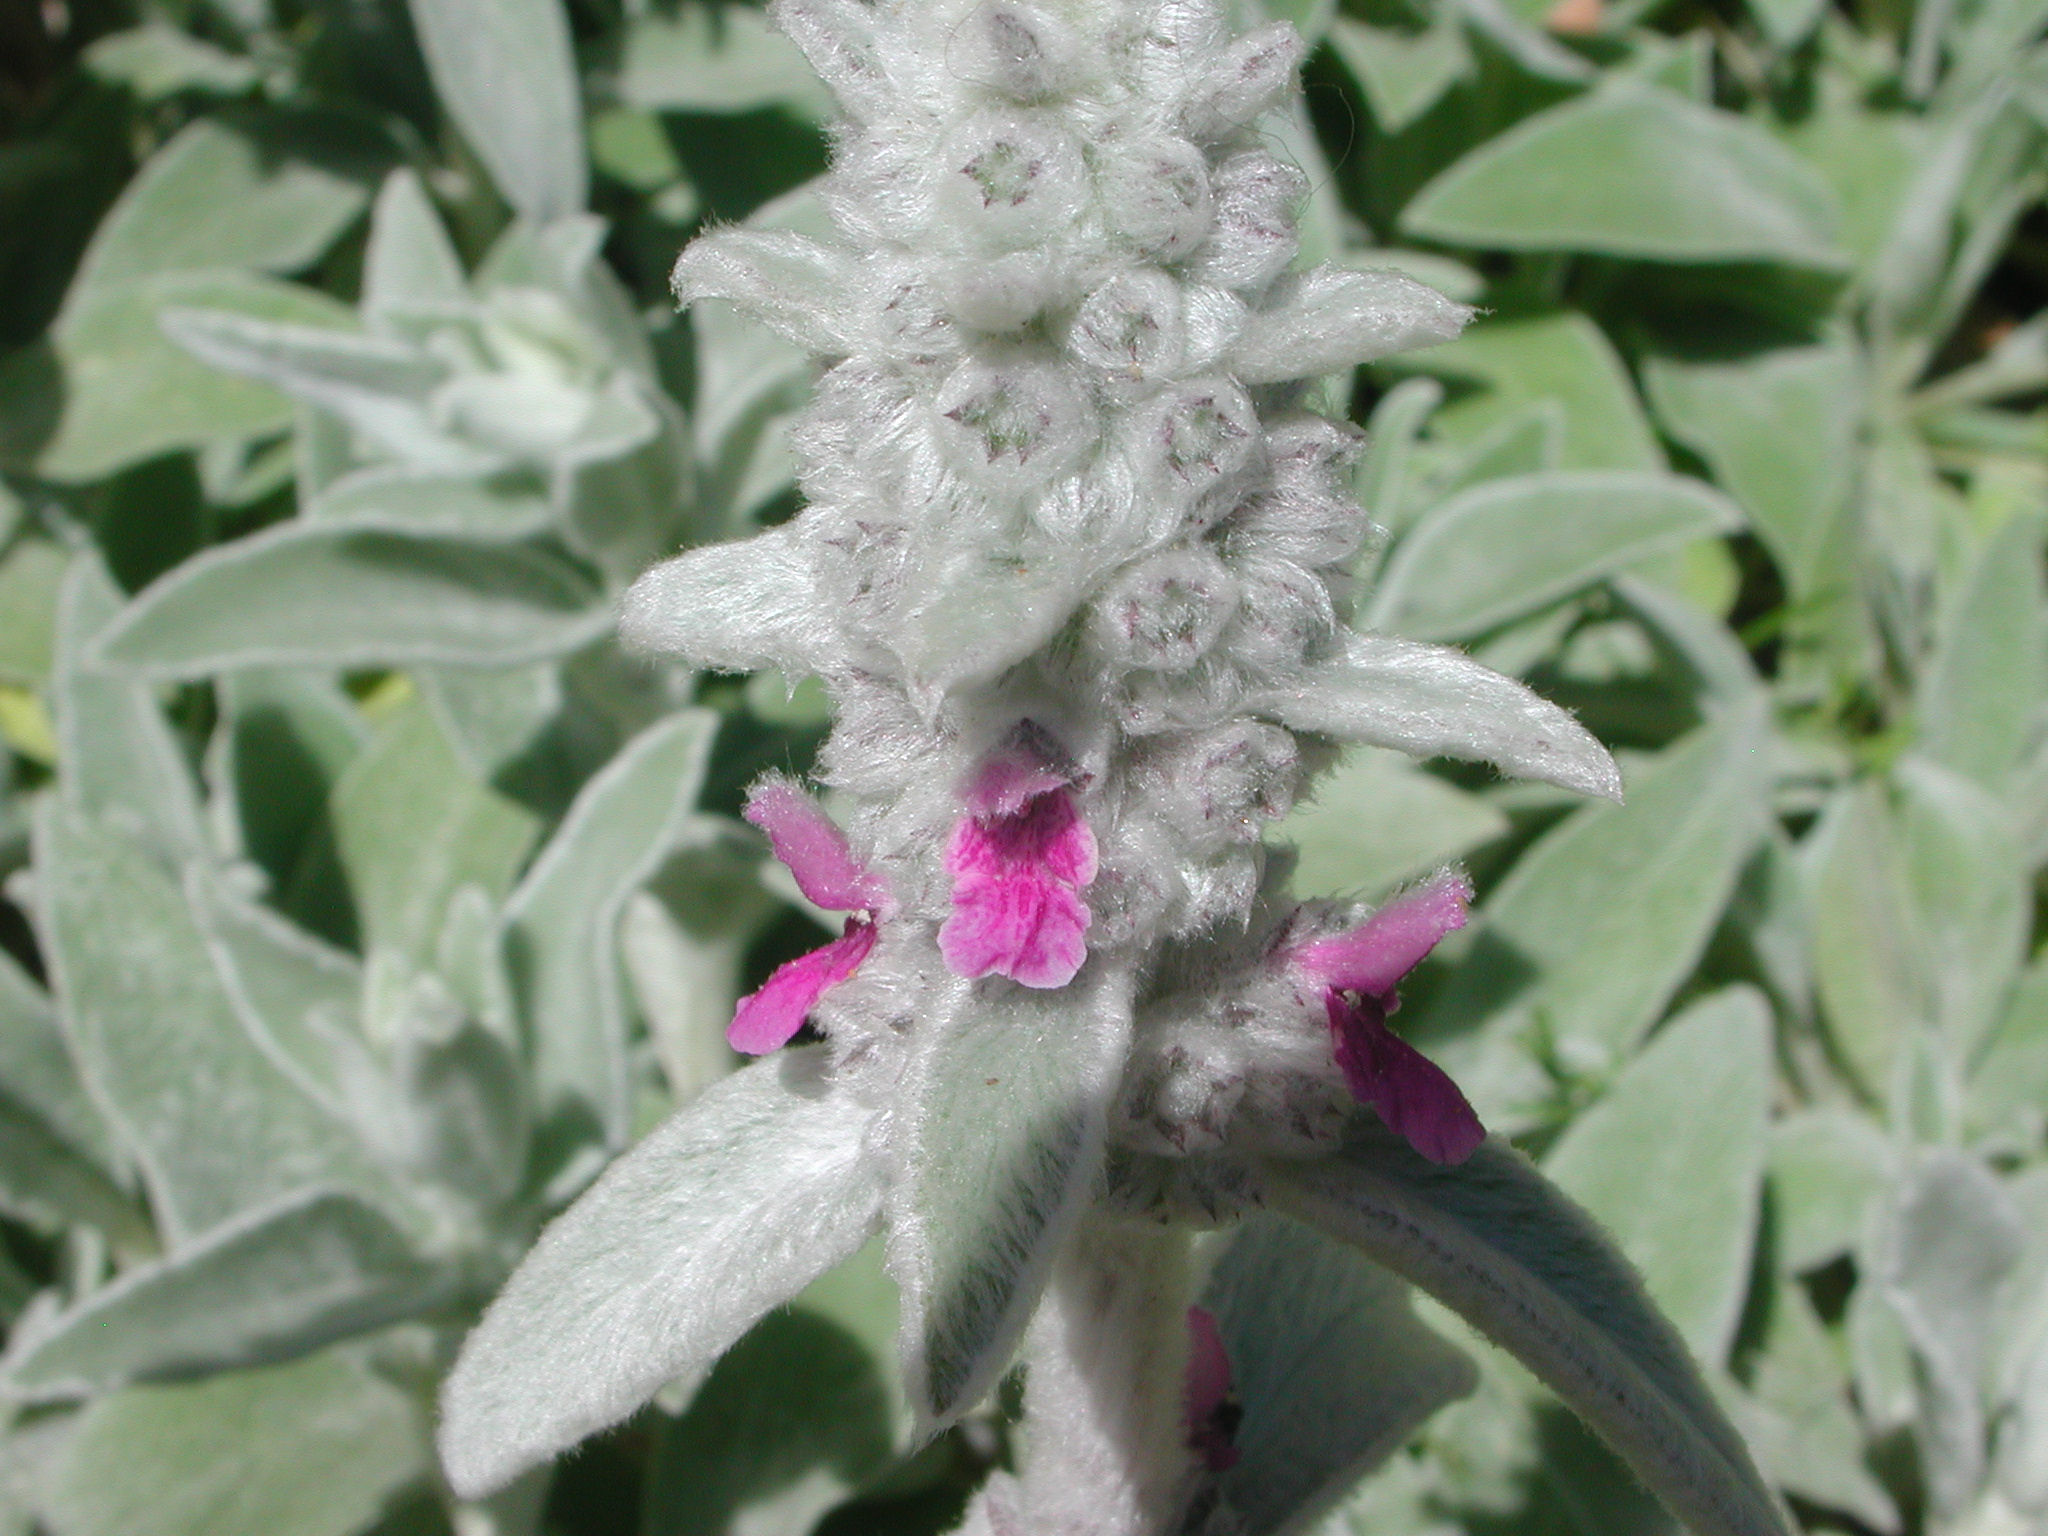 Flowers of Lamb’s Ear | Nature Photo Gallery